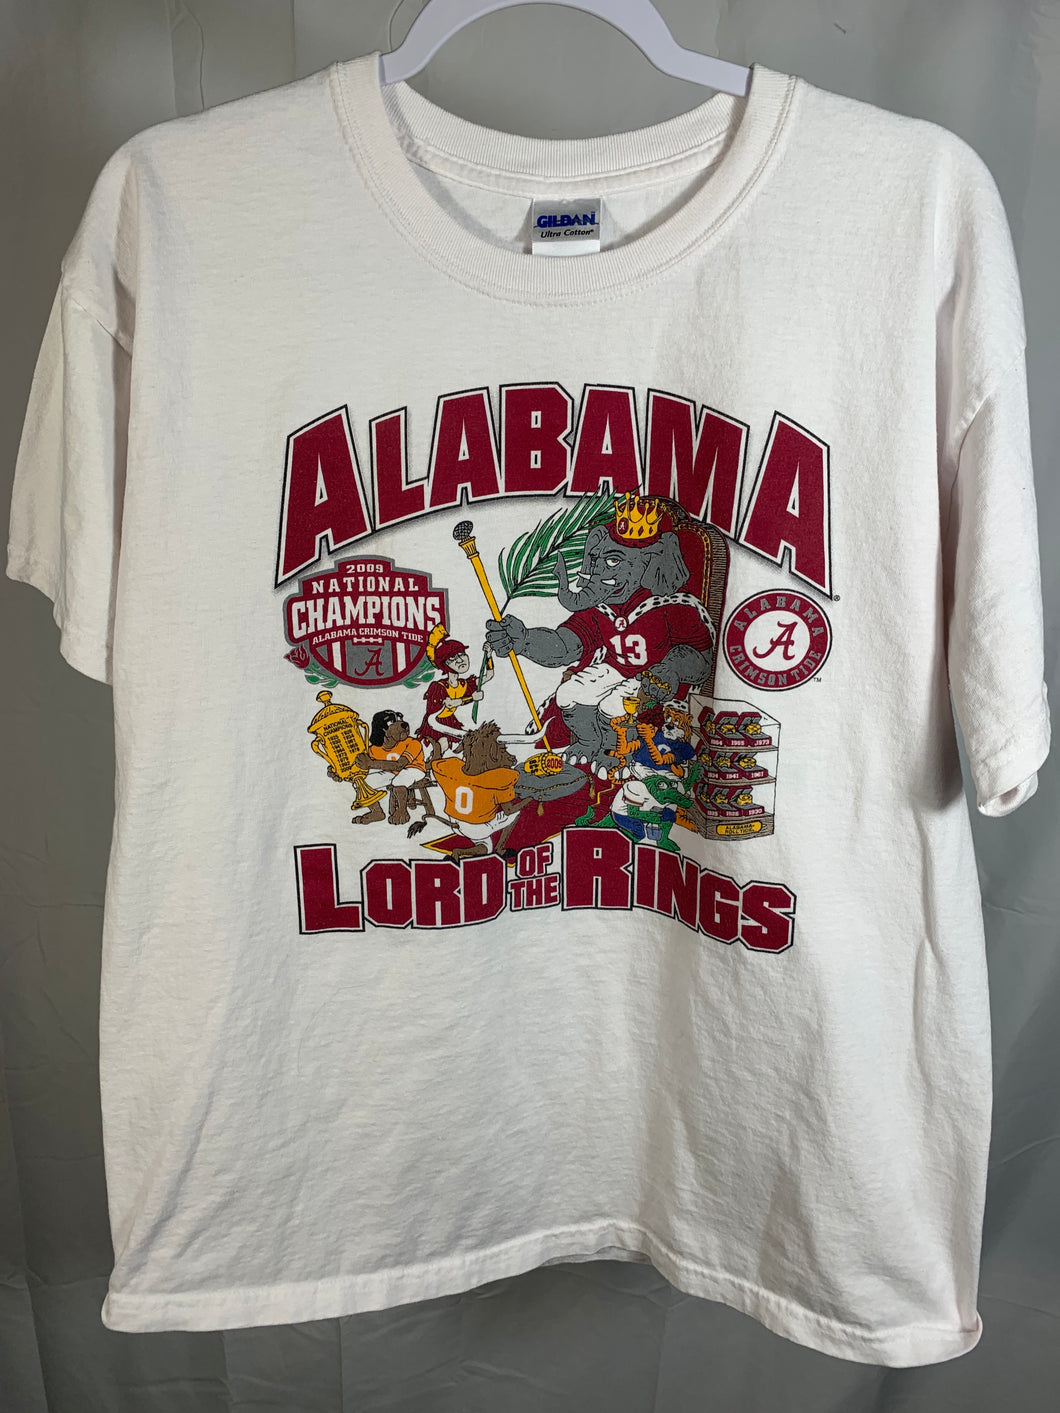 2009 National Champs White T-Shirt Large